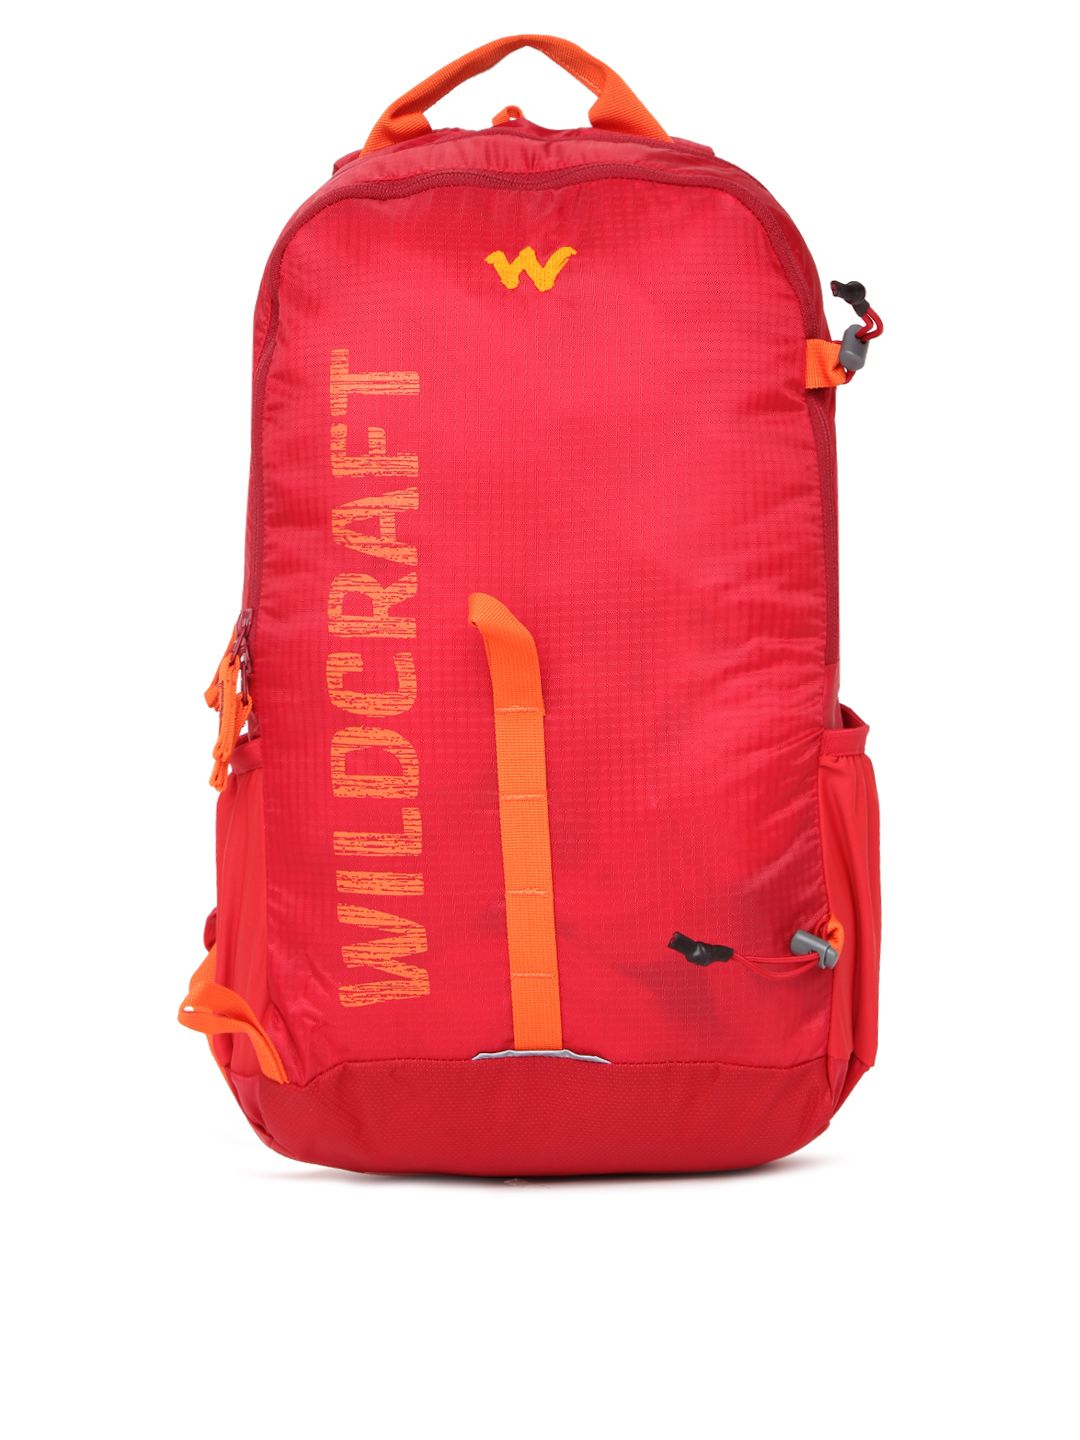 Wildcraft Unisex Red Rock & Ice 20 Backpack Price in India